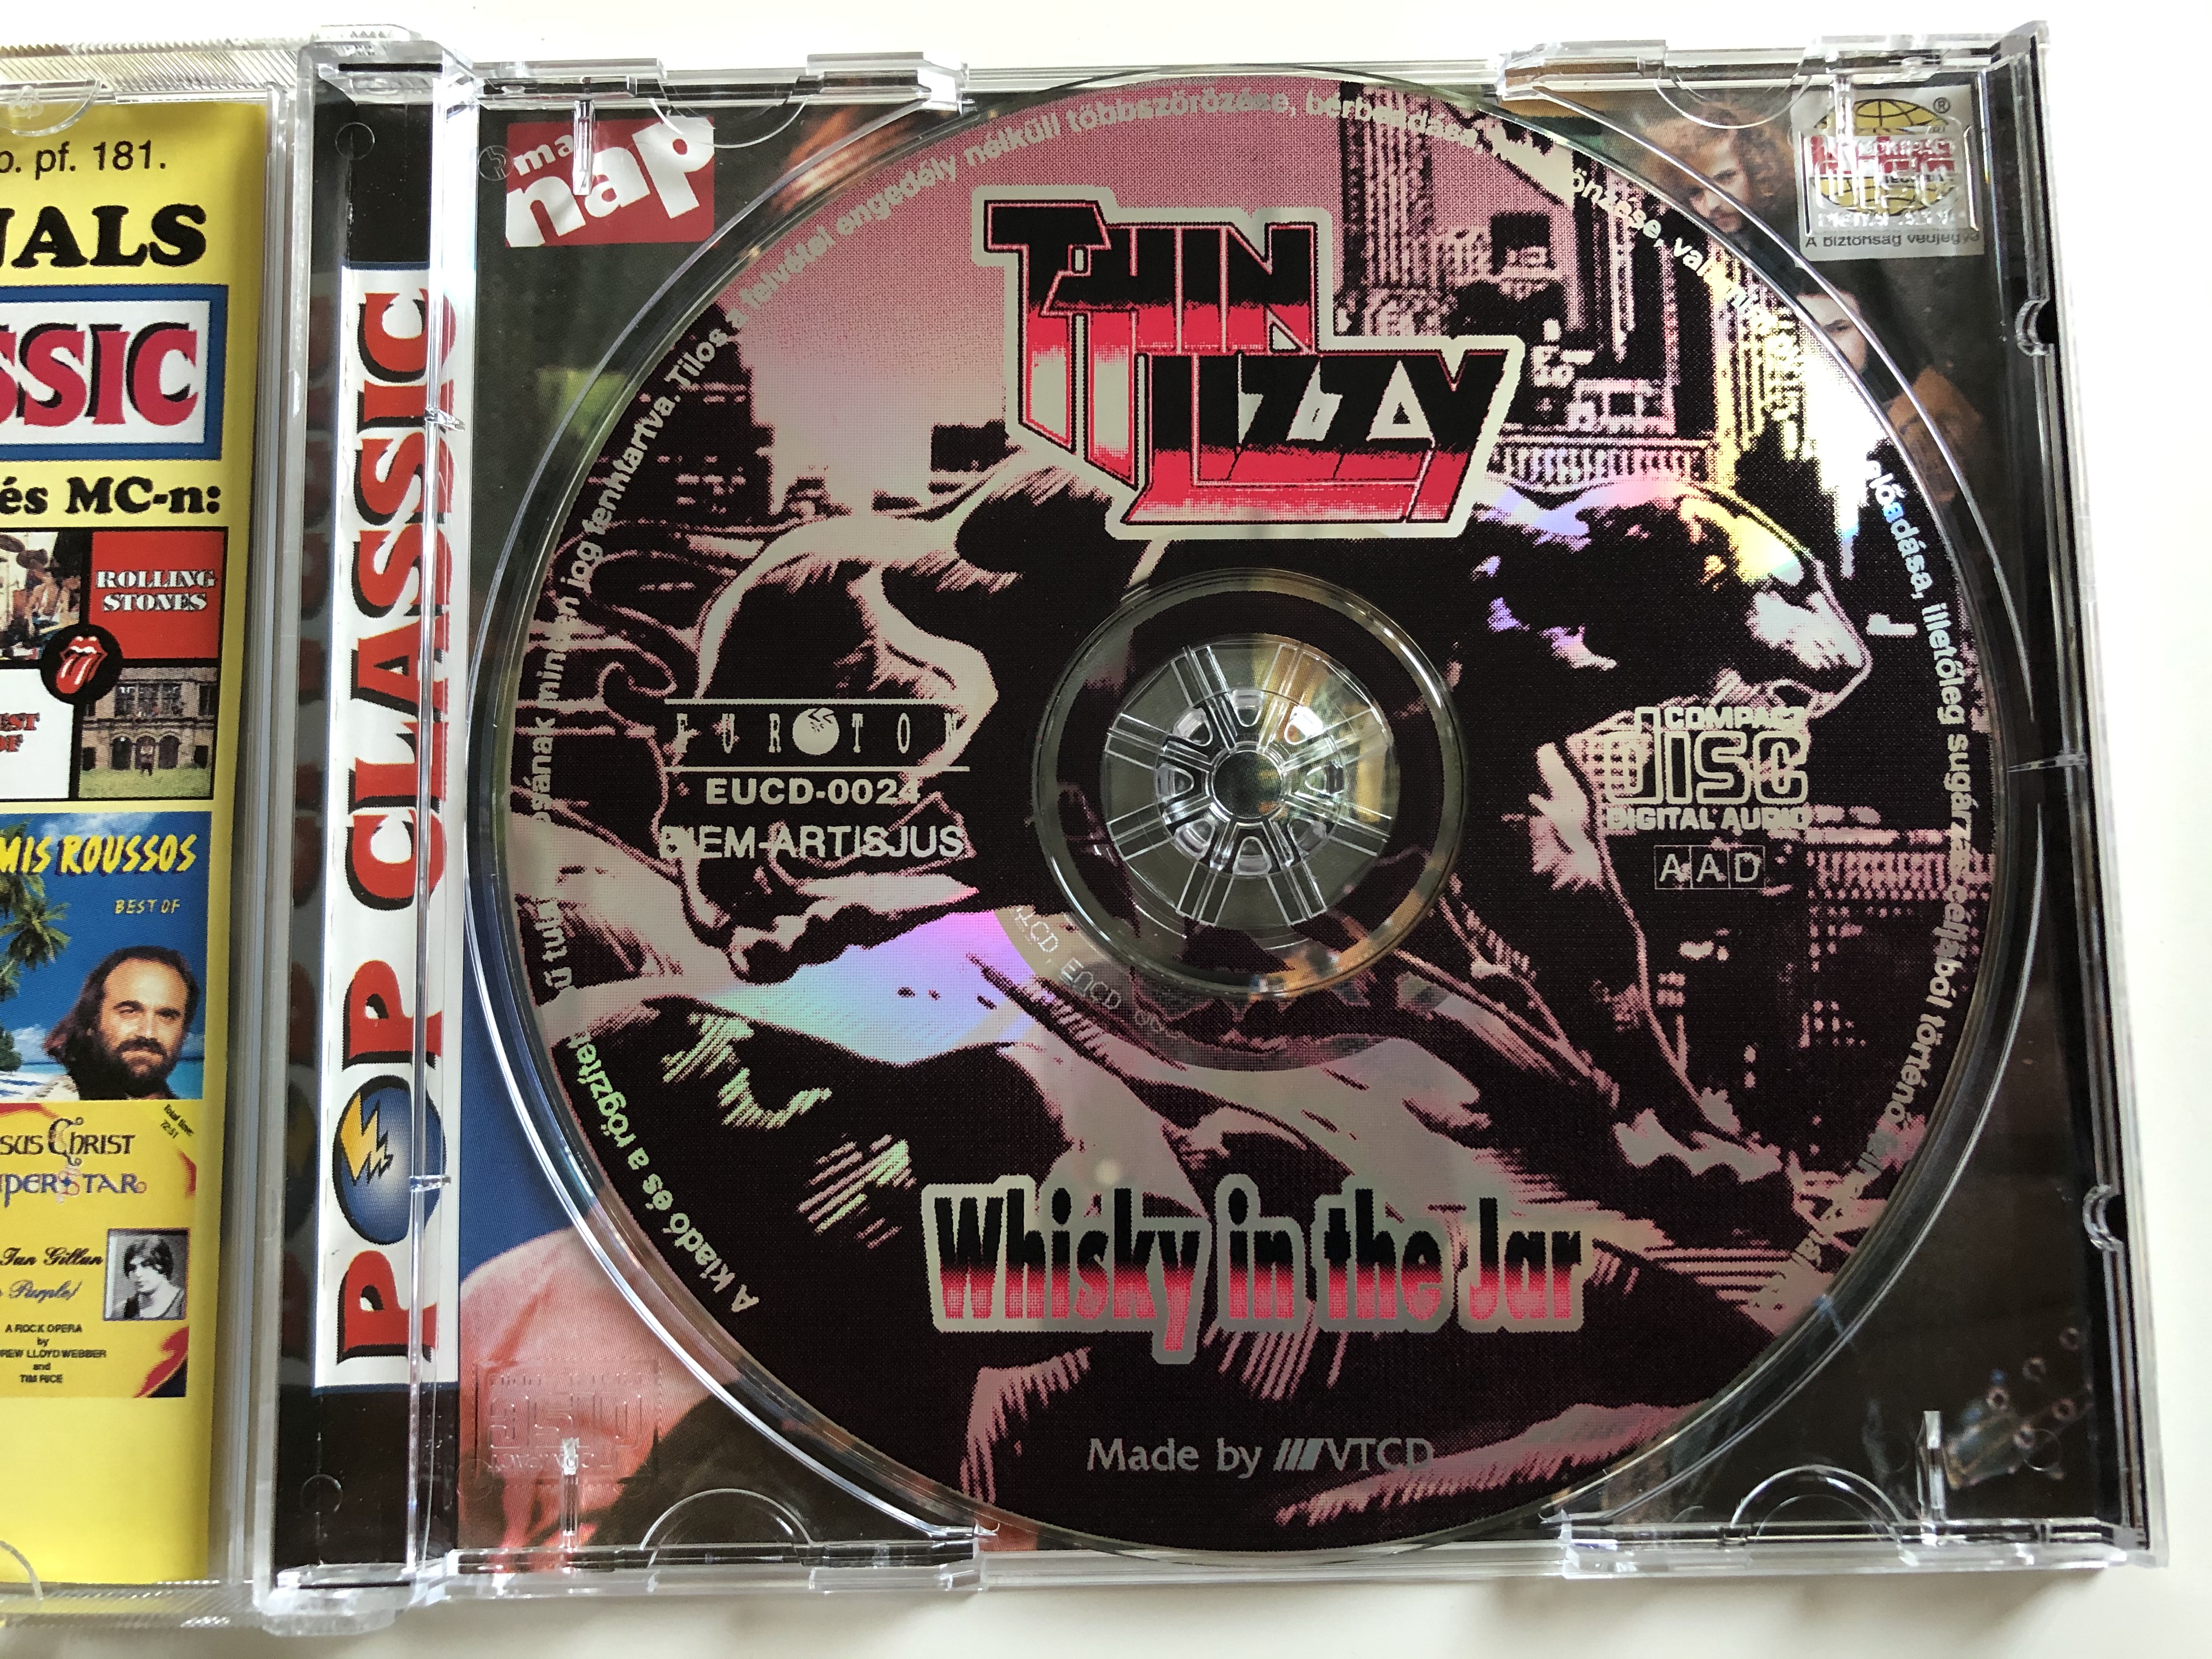 whisky-in-the-jar-thin-lizzy-total-time-7251-pop-classic-euroton-audio-cd-eucd-0024-2-.jpg